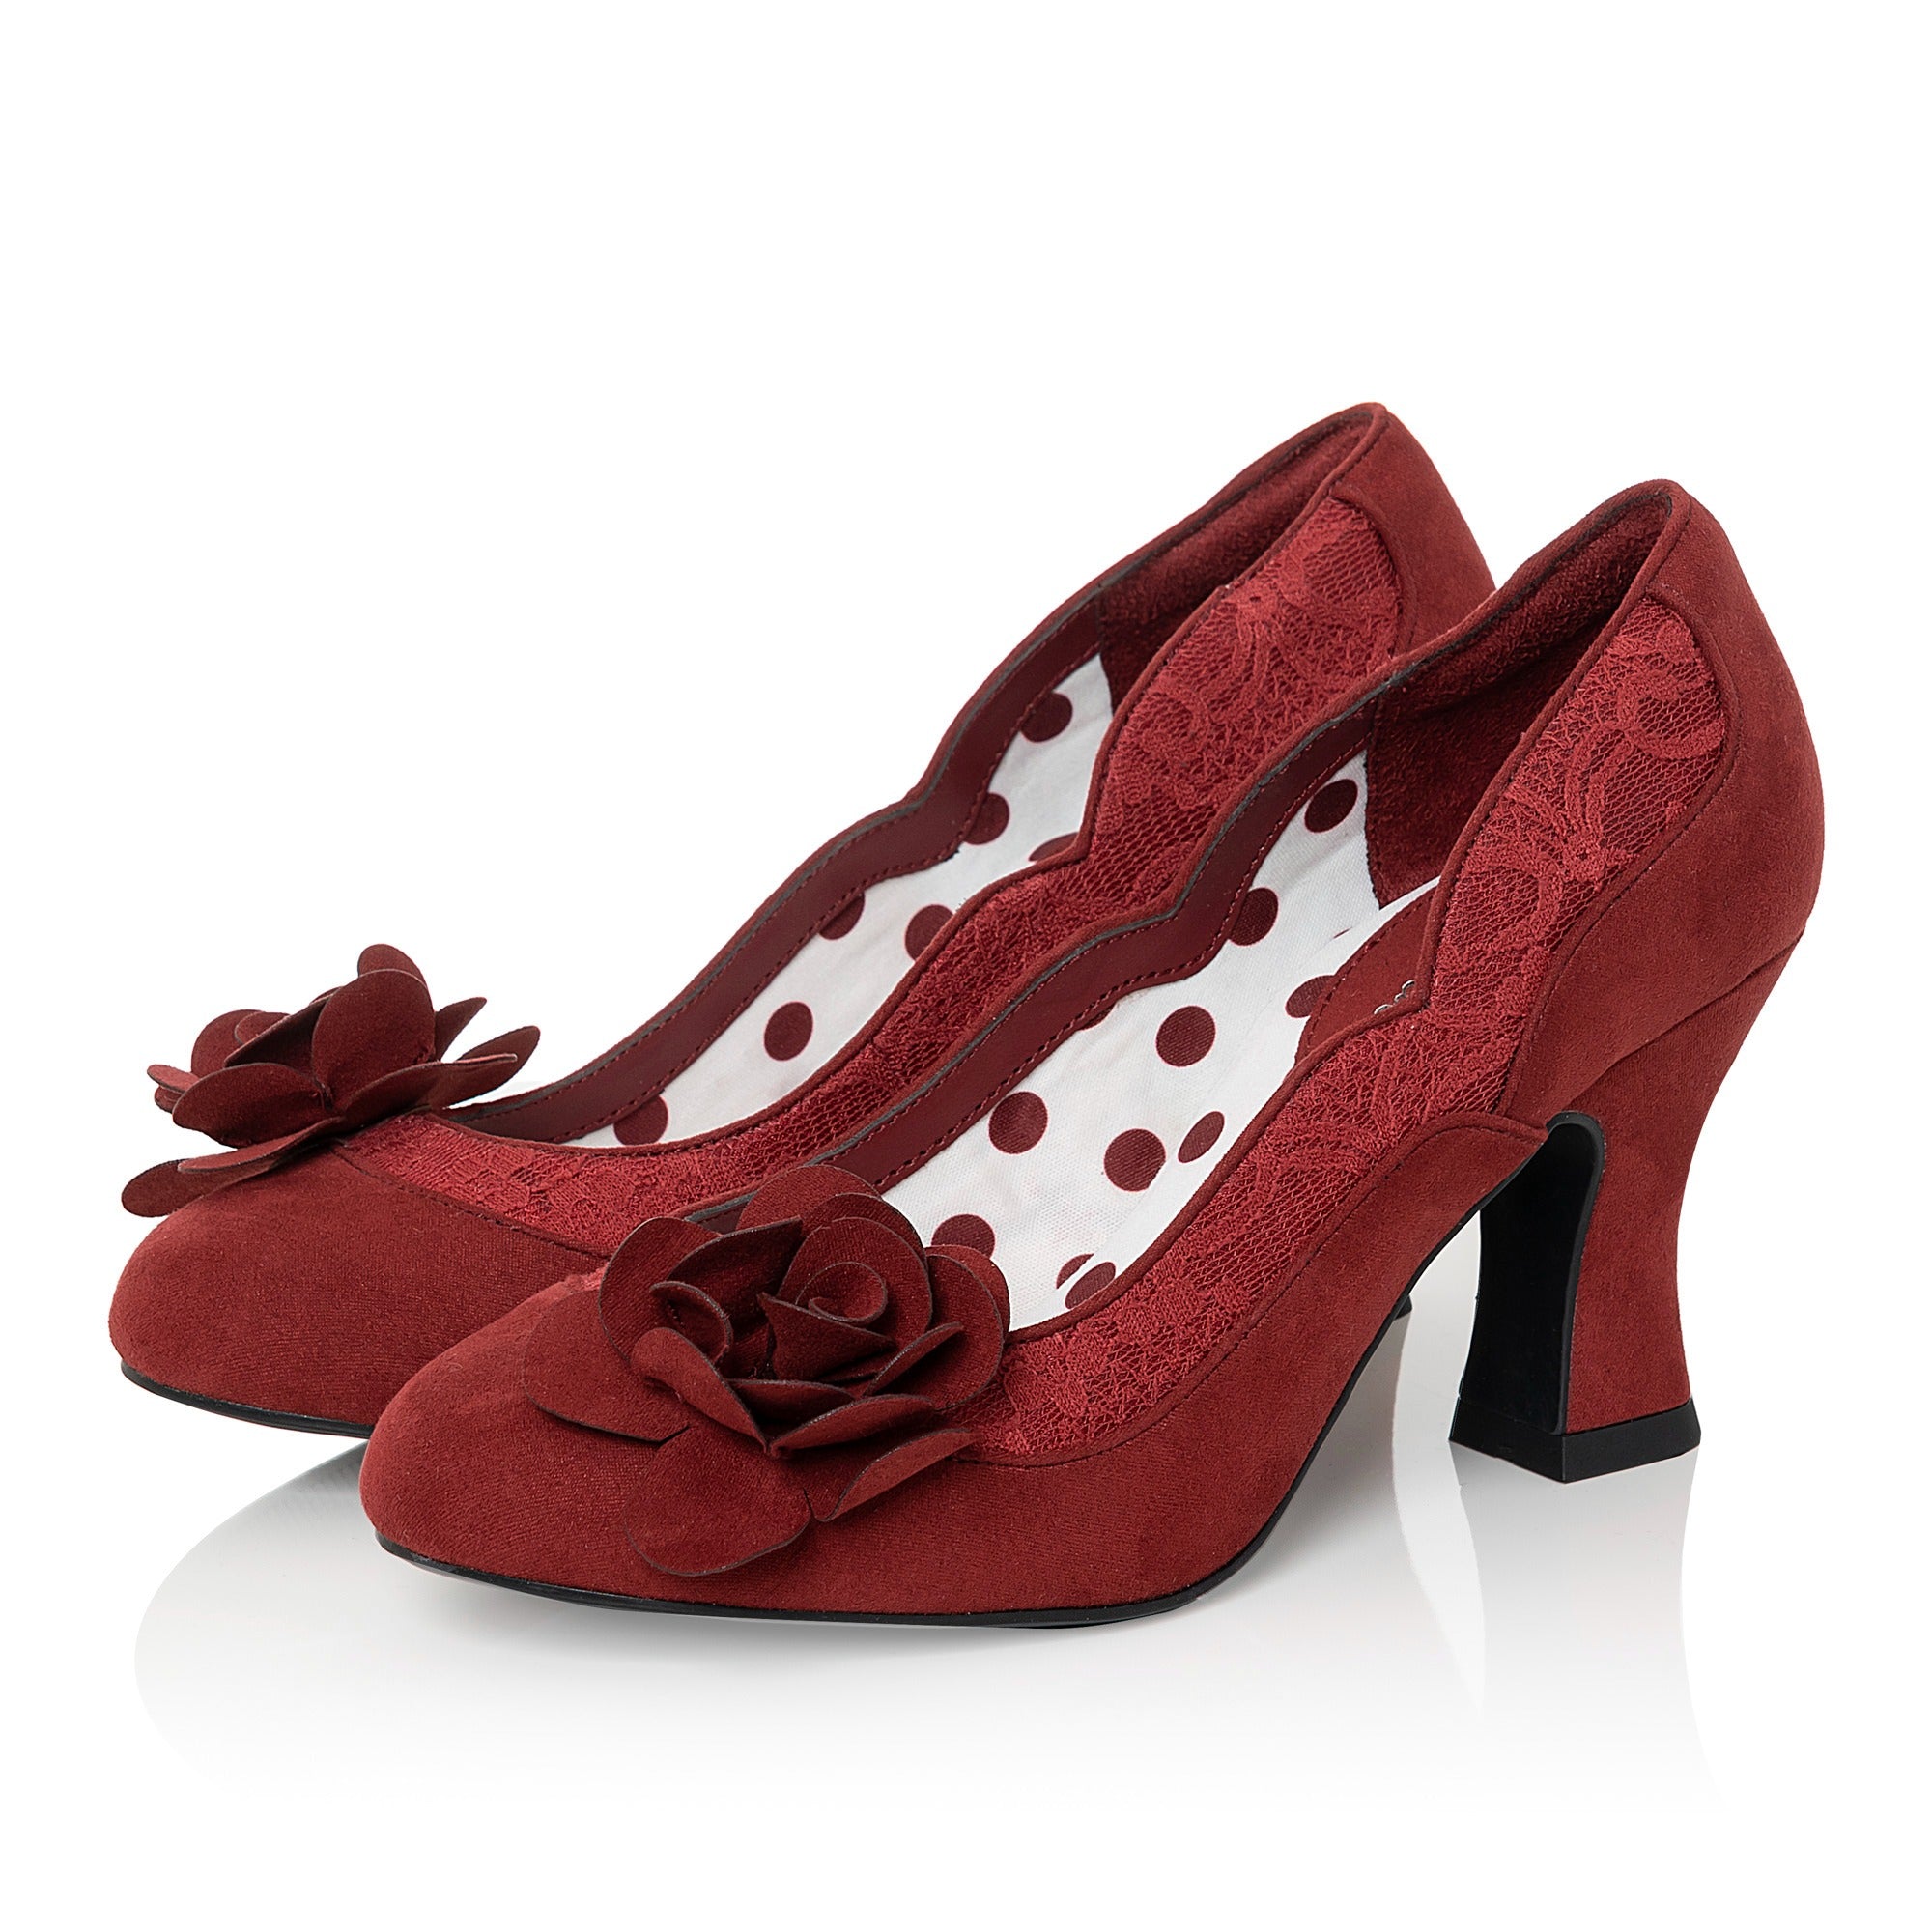 Ruby Shoo Crimson Red Heeled Corsage Court Shoes